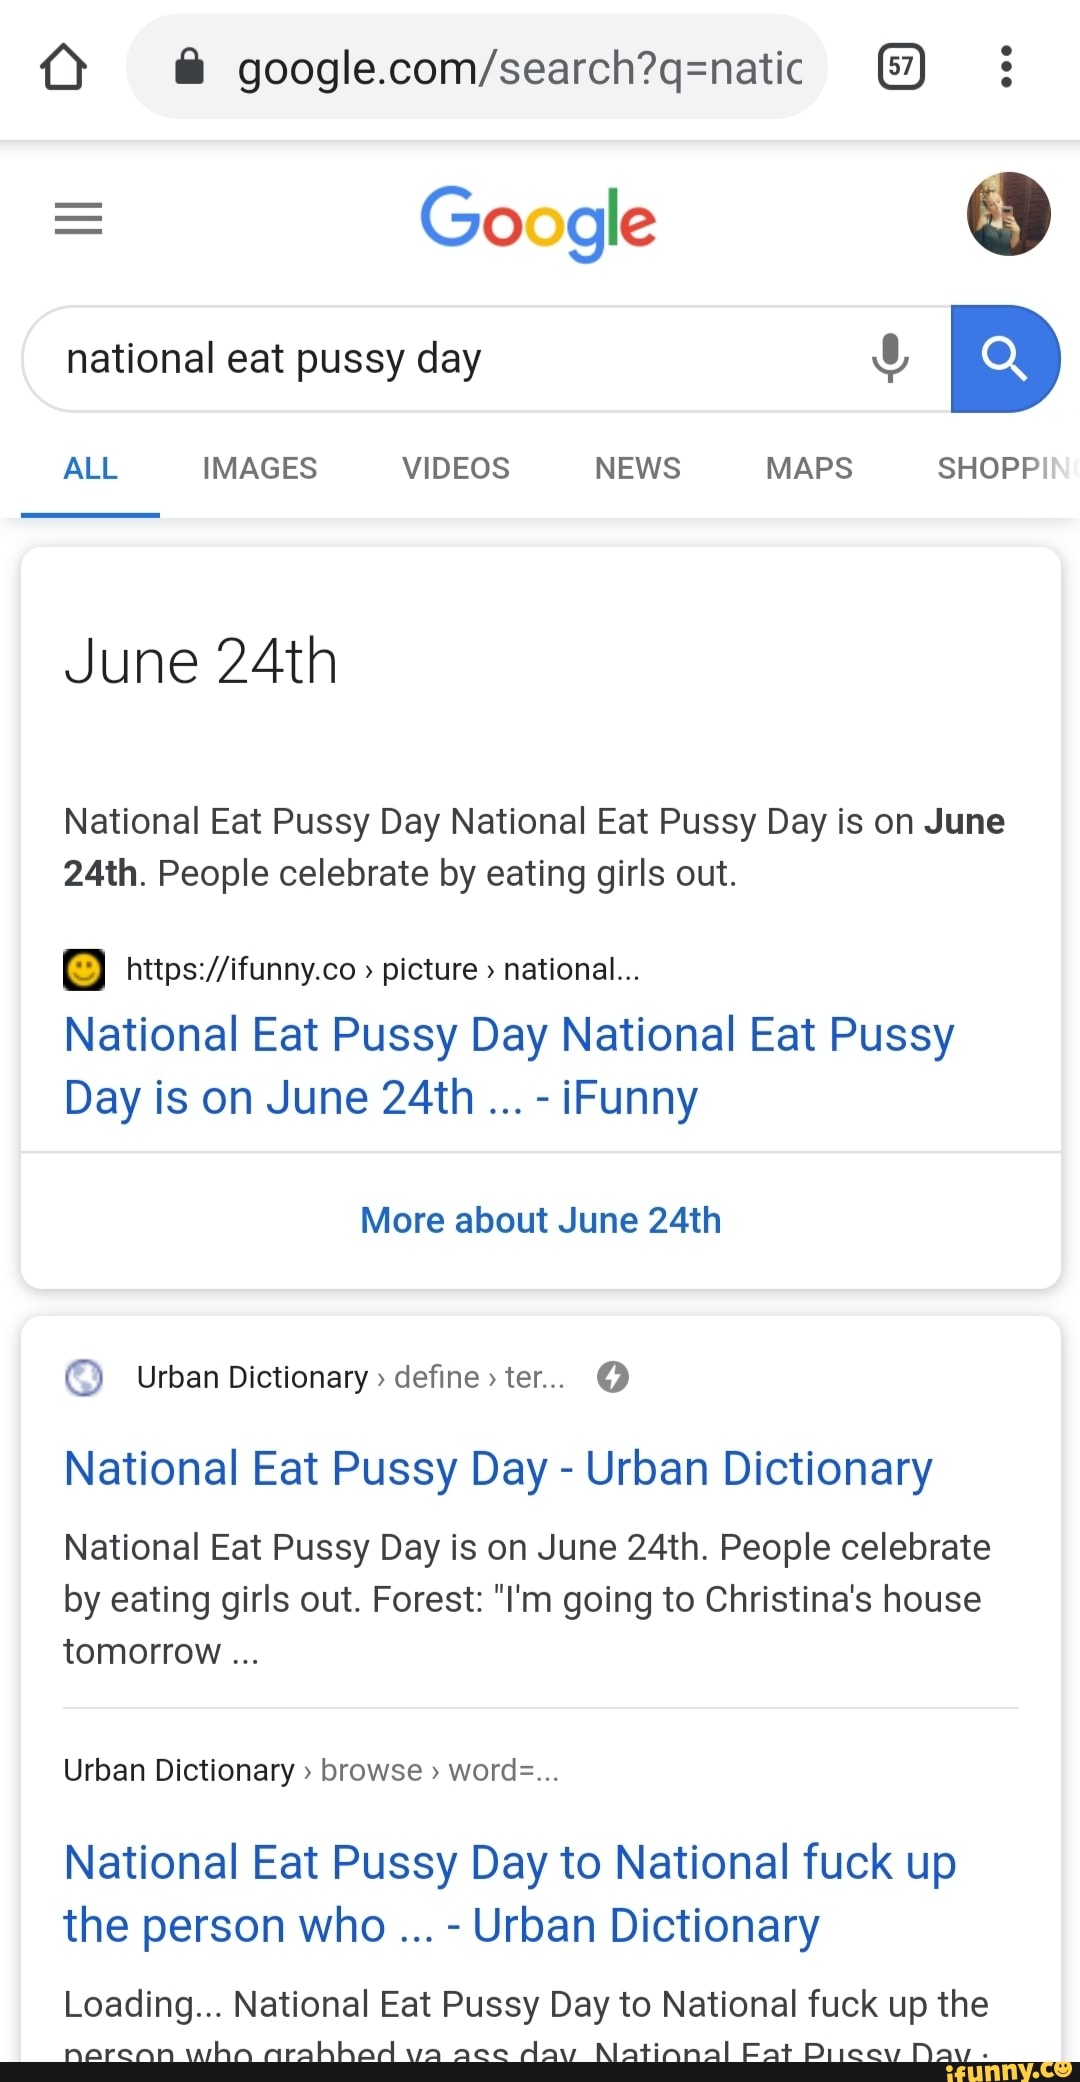 Nation eat pussy day